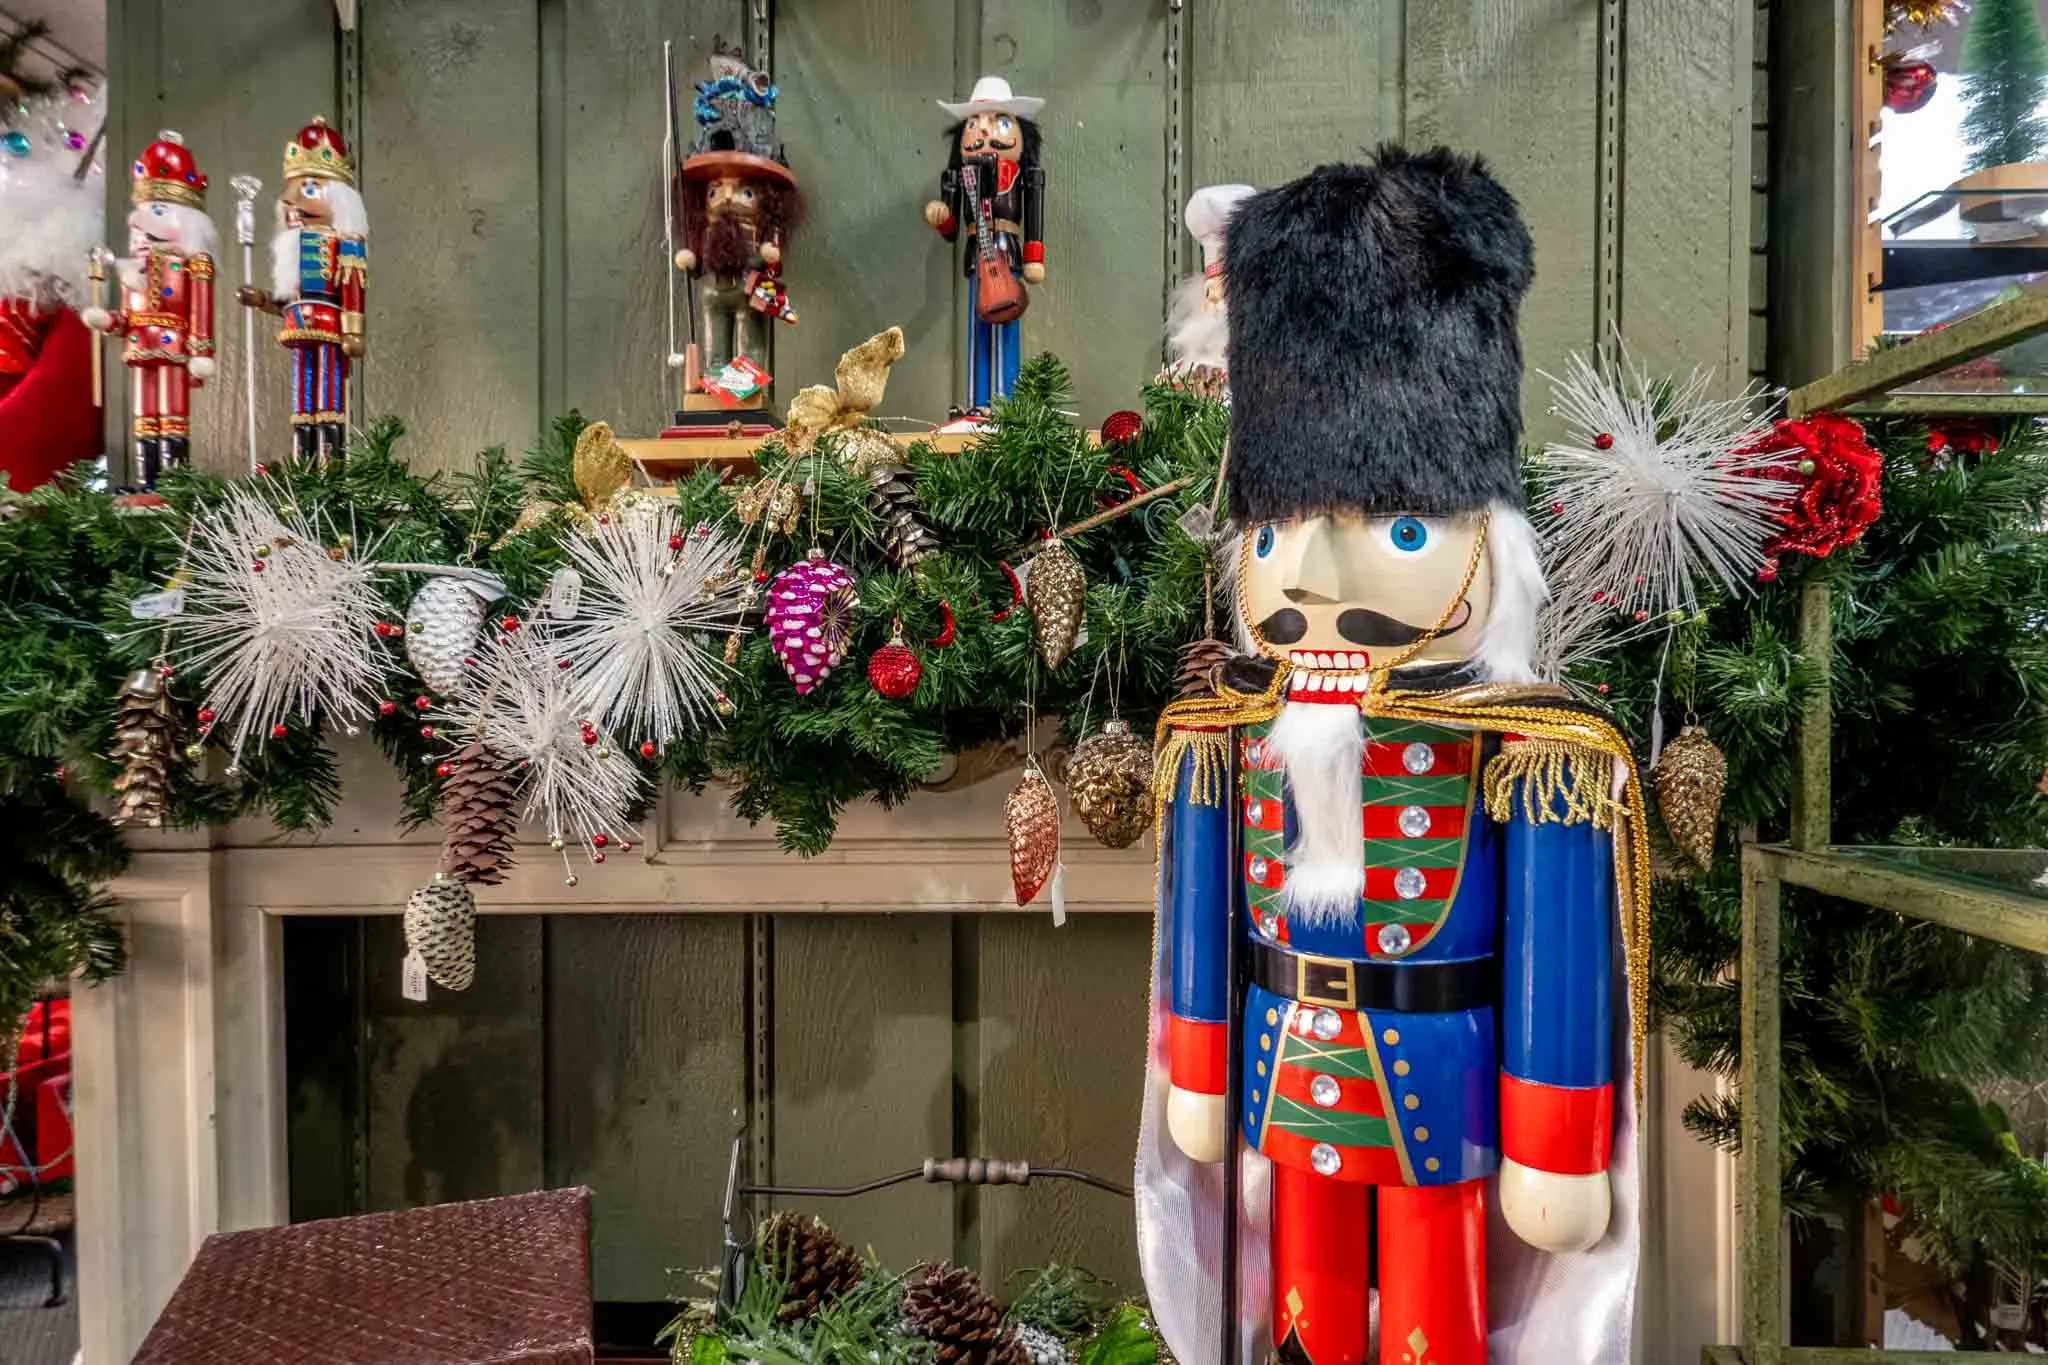 3-foot-tall Nutcracker in front of a mantel lined with small Nutcrackers